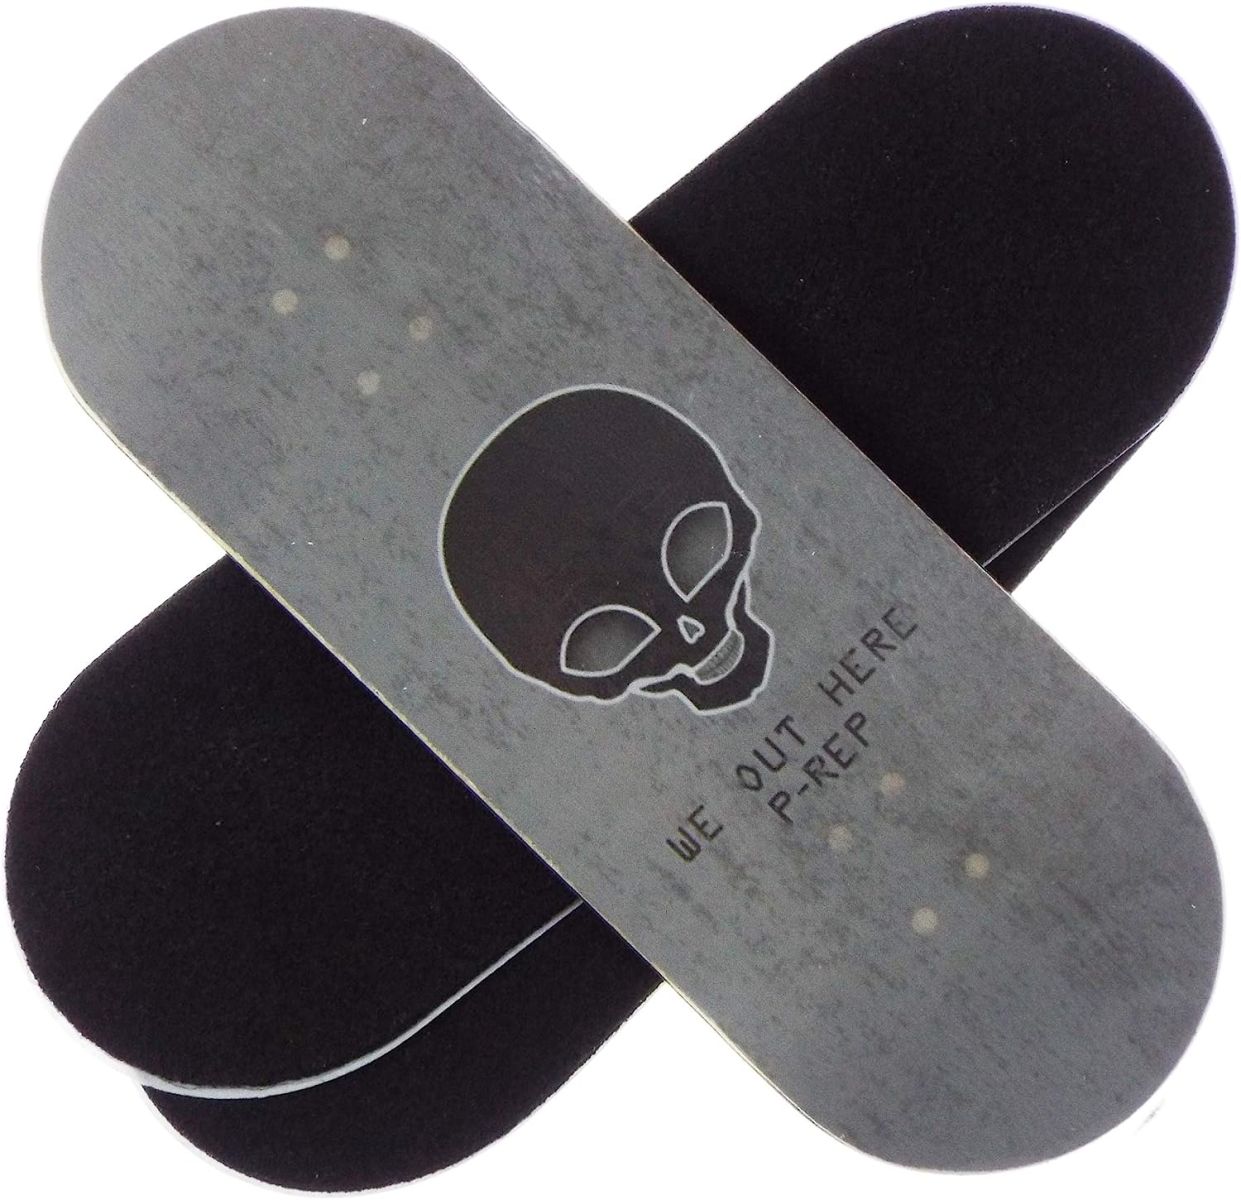 P-REP We Out Here - Solid Performance Complete Wooden Fingerboard (Chromite, 34mm x 97mm)